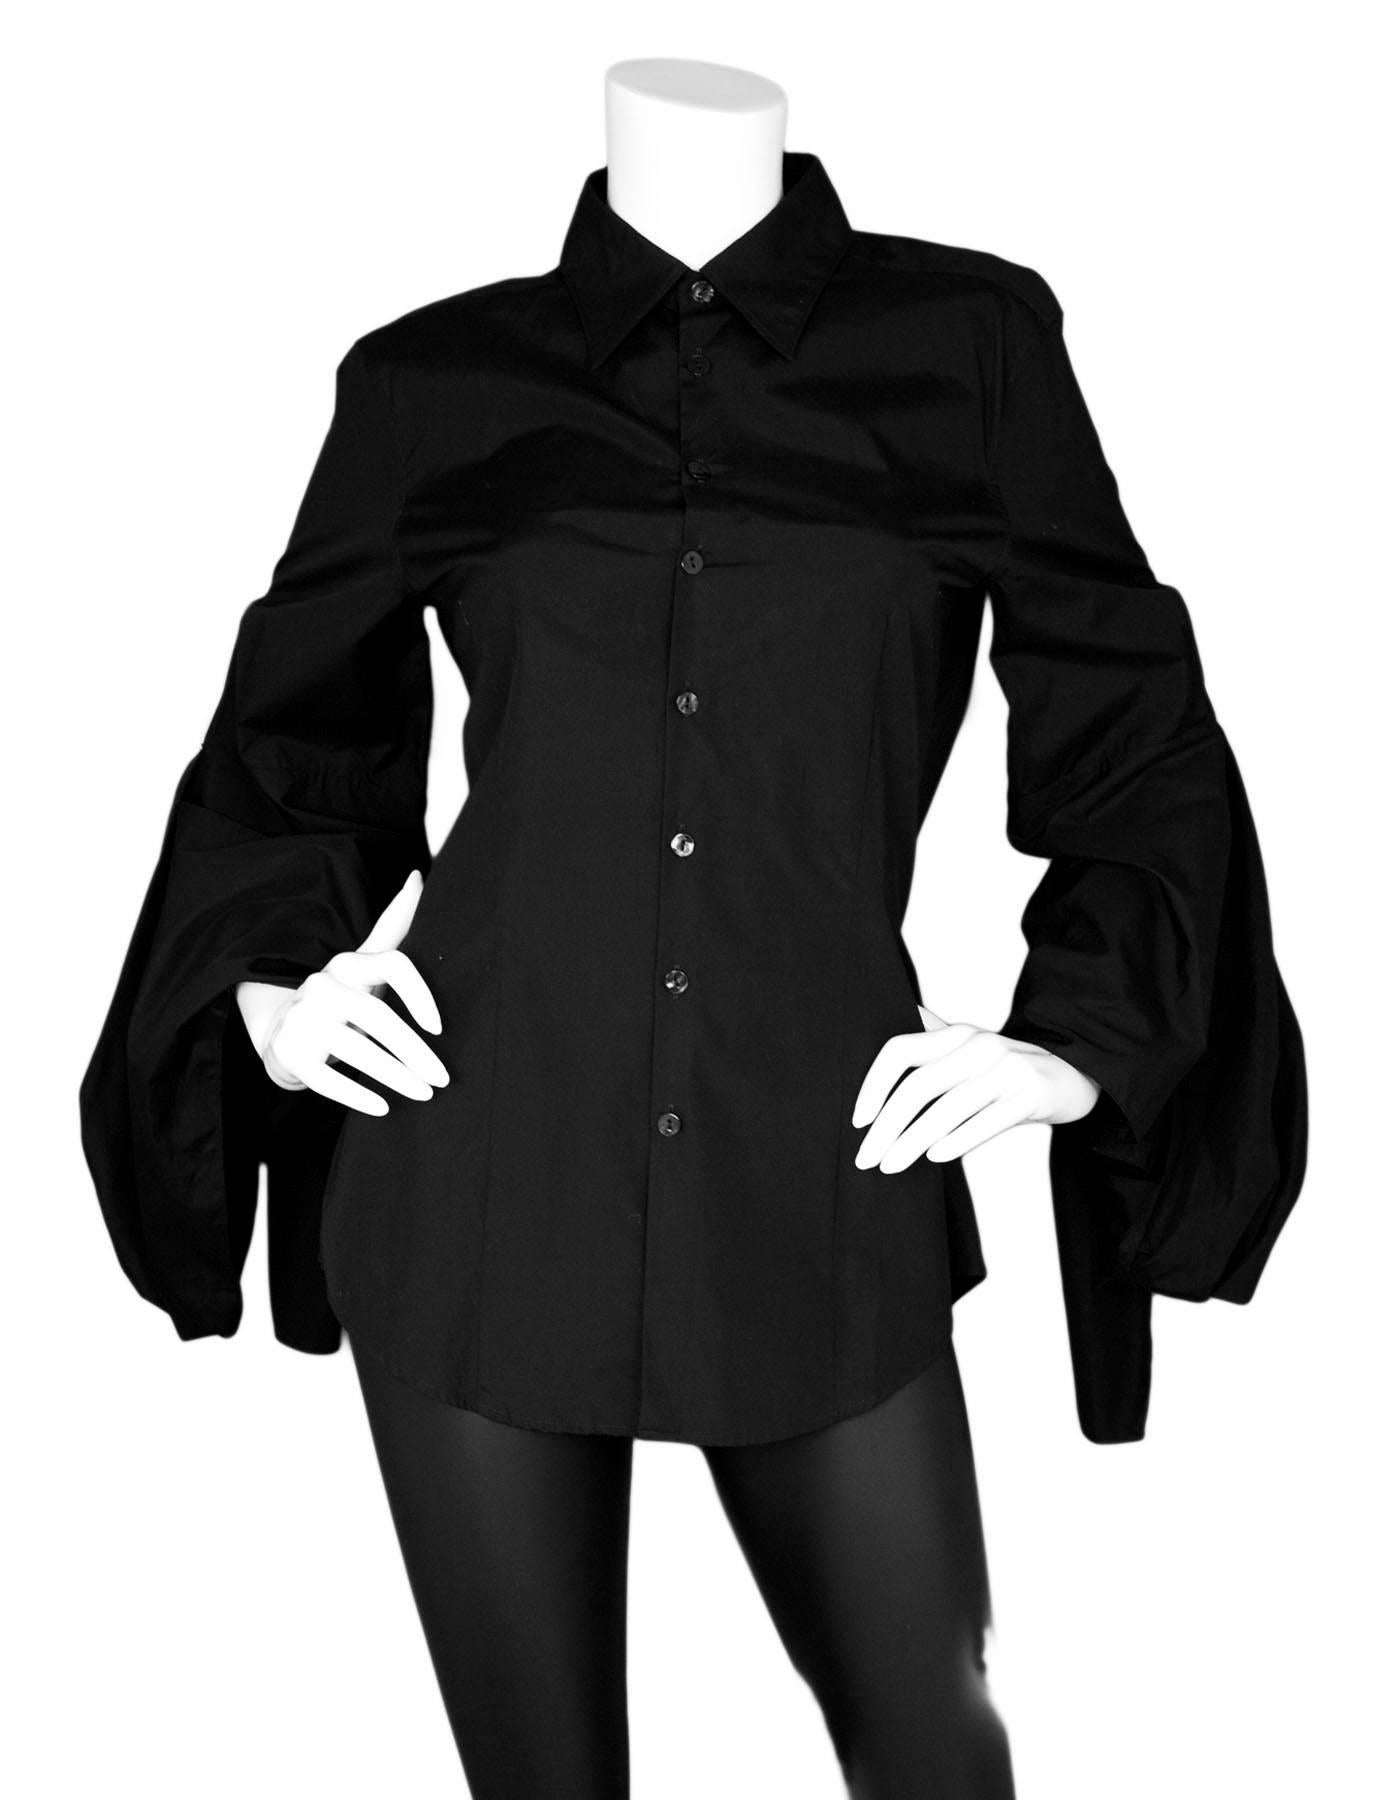 Jean Paul Gaultier Femme Black Blouse with Arm Ties Sz IT44

Made In: Italy
Color: Black
Composition: 100% Cotton 
Lining: None
Closure/Opening: Front buton closure
Overall Condition: Excellent pre-owned condition
Included: Jean Paul Gaultier